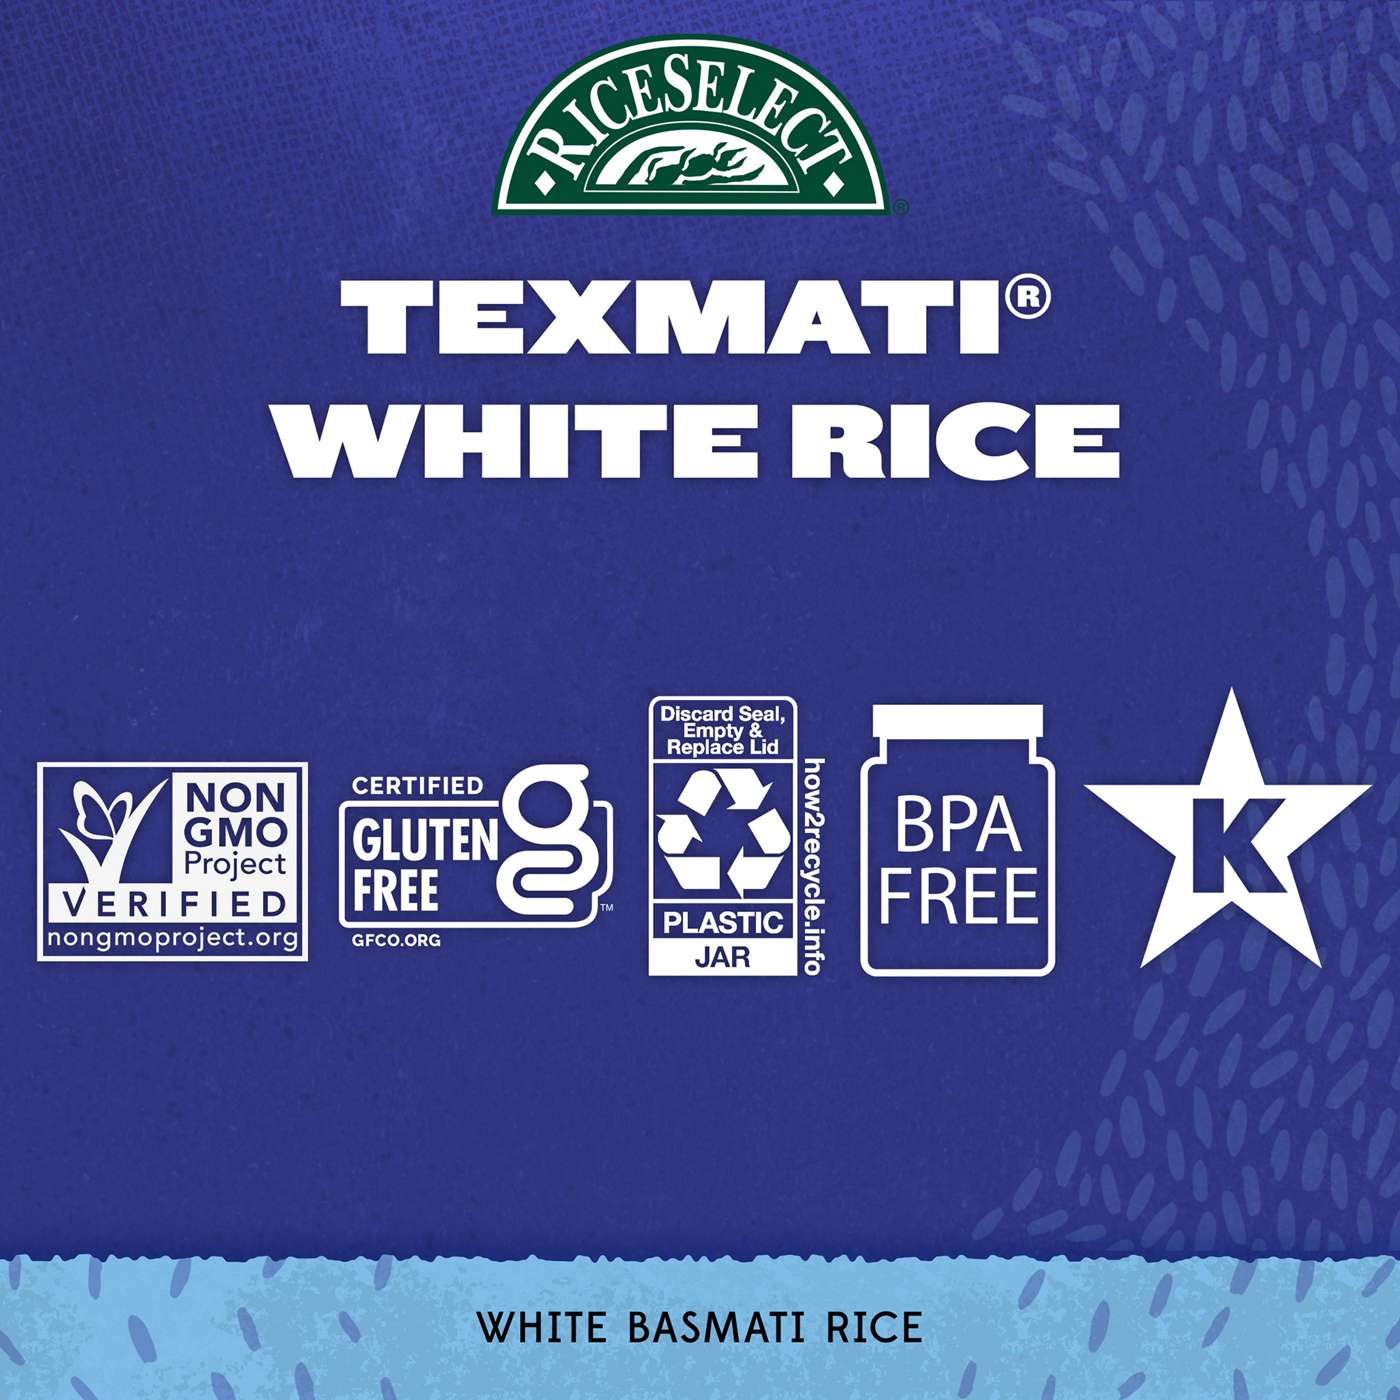 RiceSelect Texmati Rice; image 6 of 6